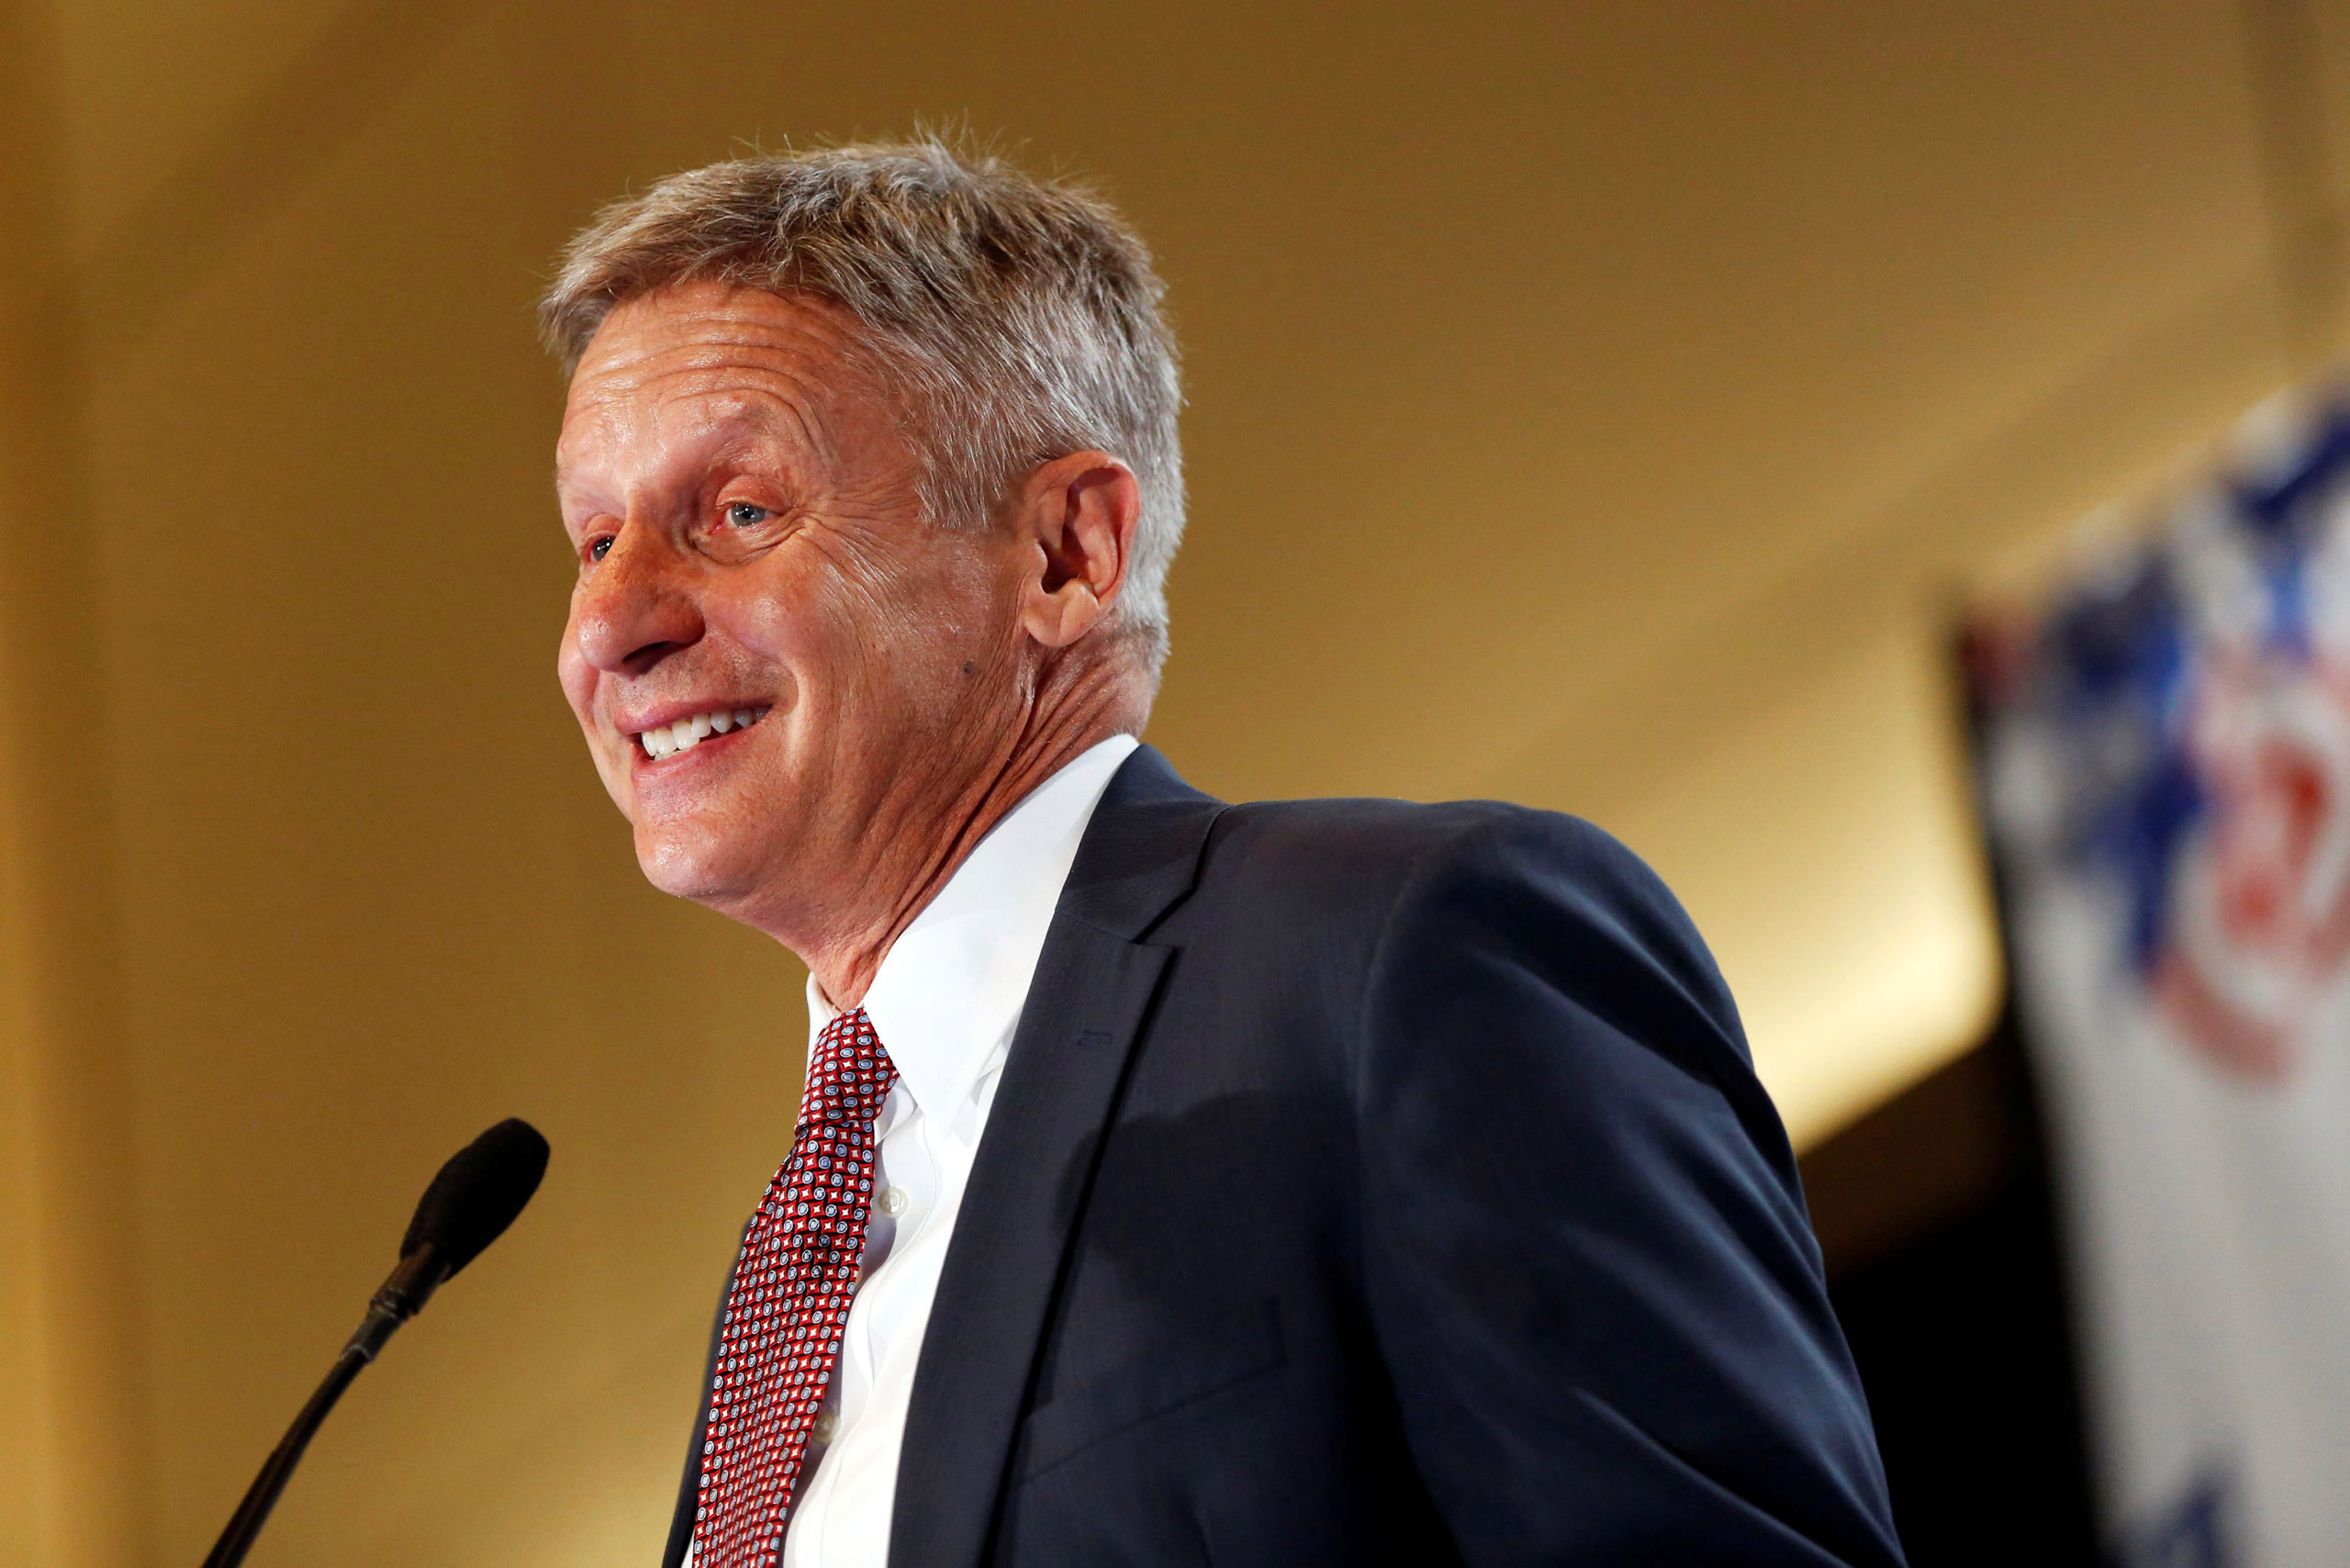 Libertarian Party presidential candidate Gary Johnson speaks during the "Politicon" convention in Pasadena, Calif. on June 25, 2016. (Patrick T. Fallon—Reuters)